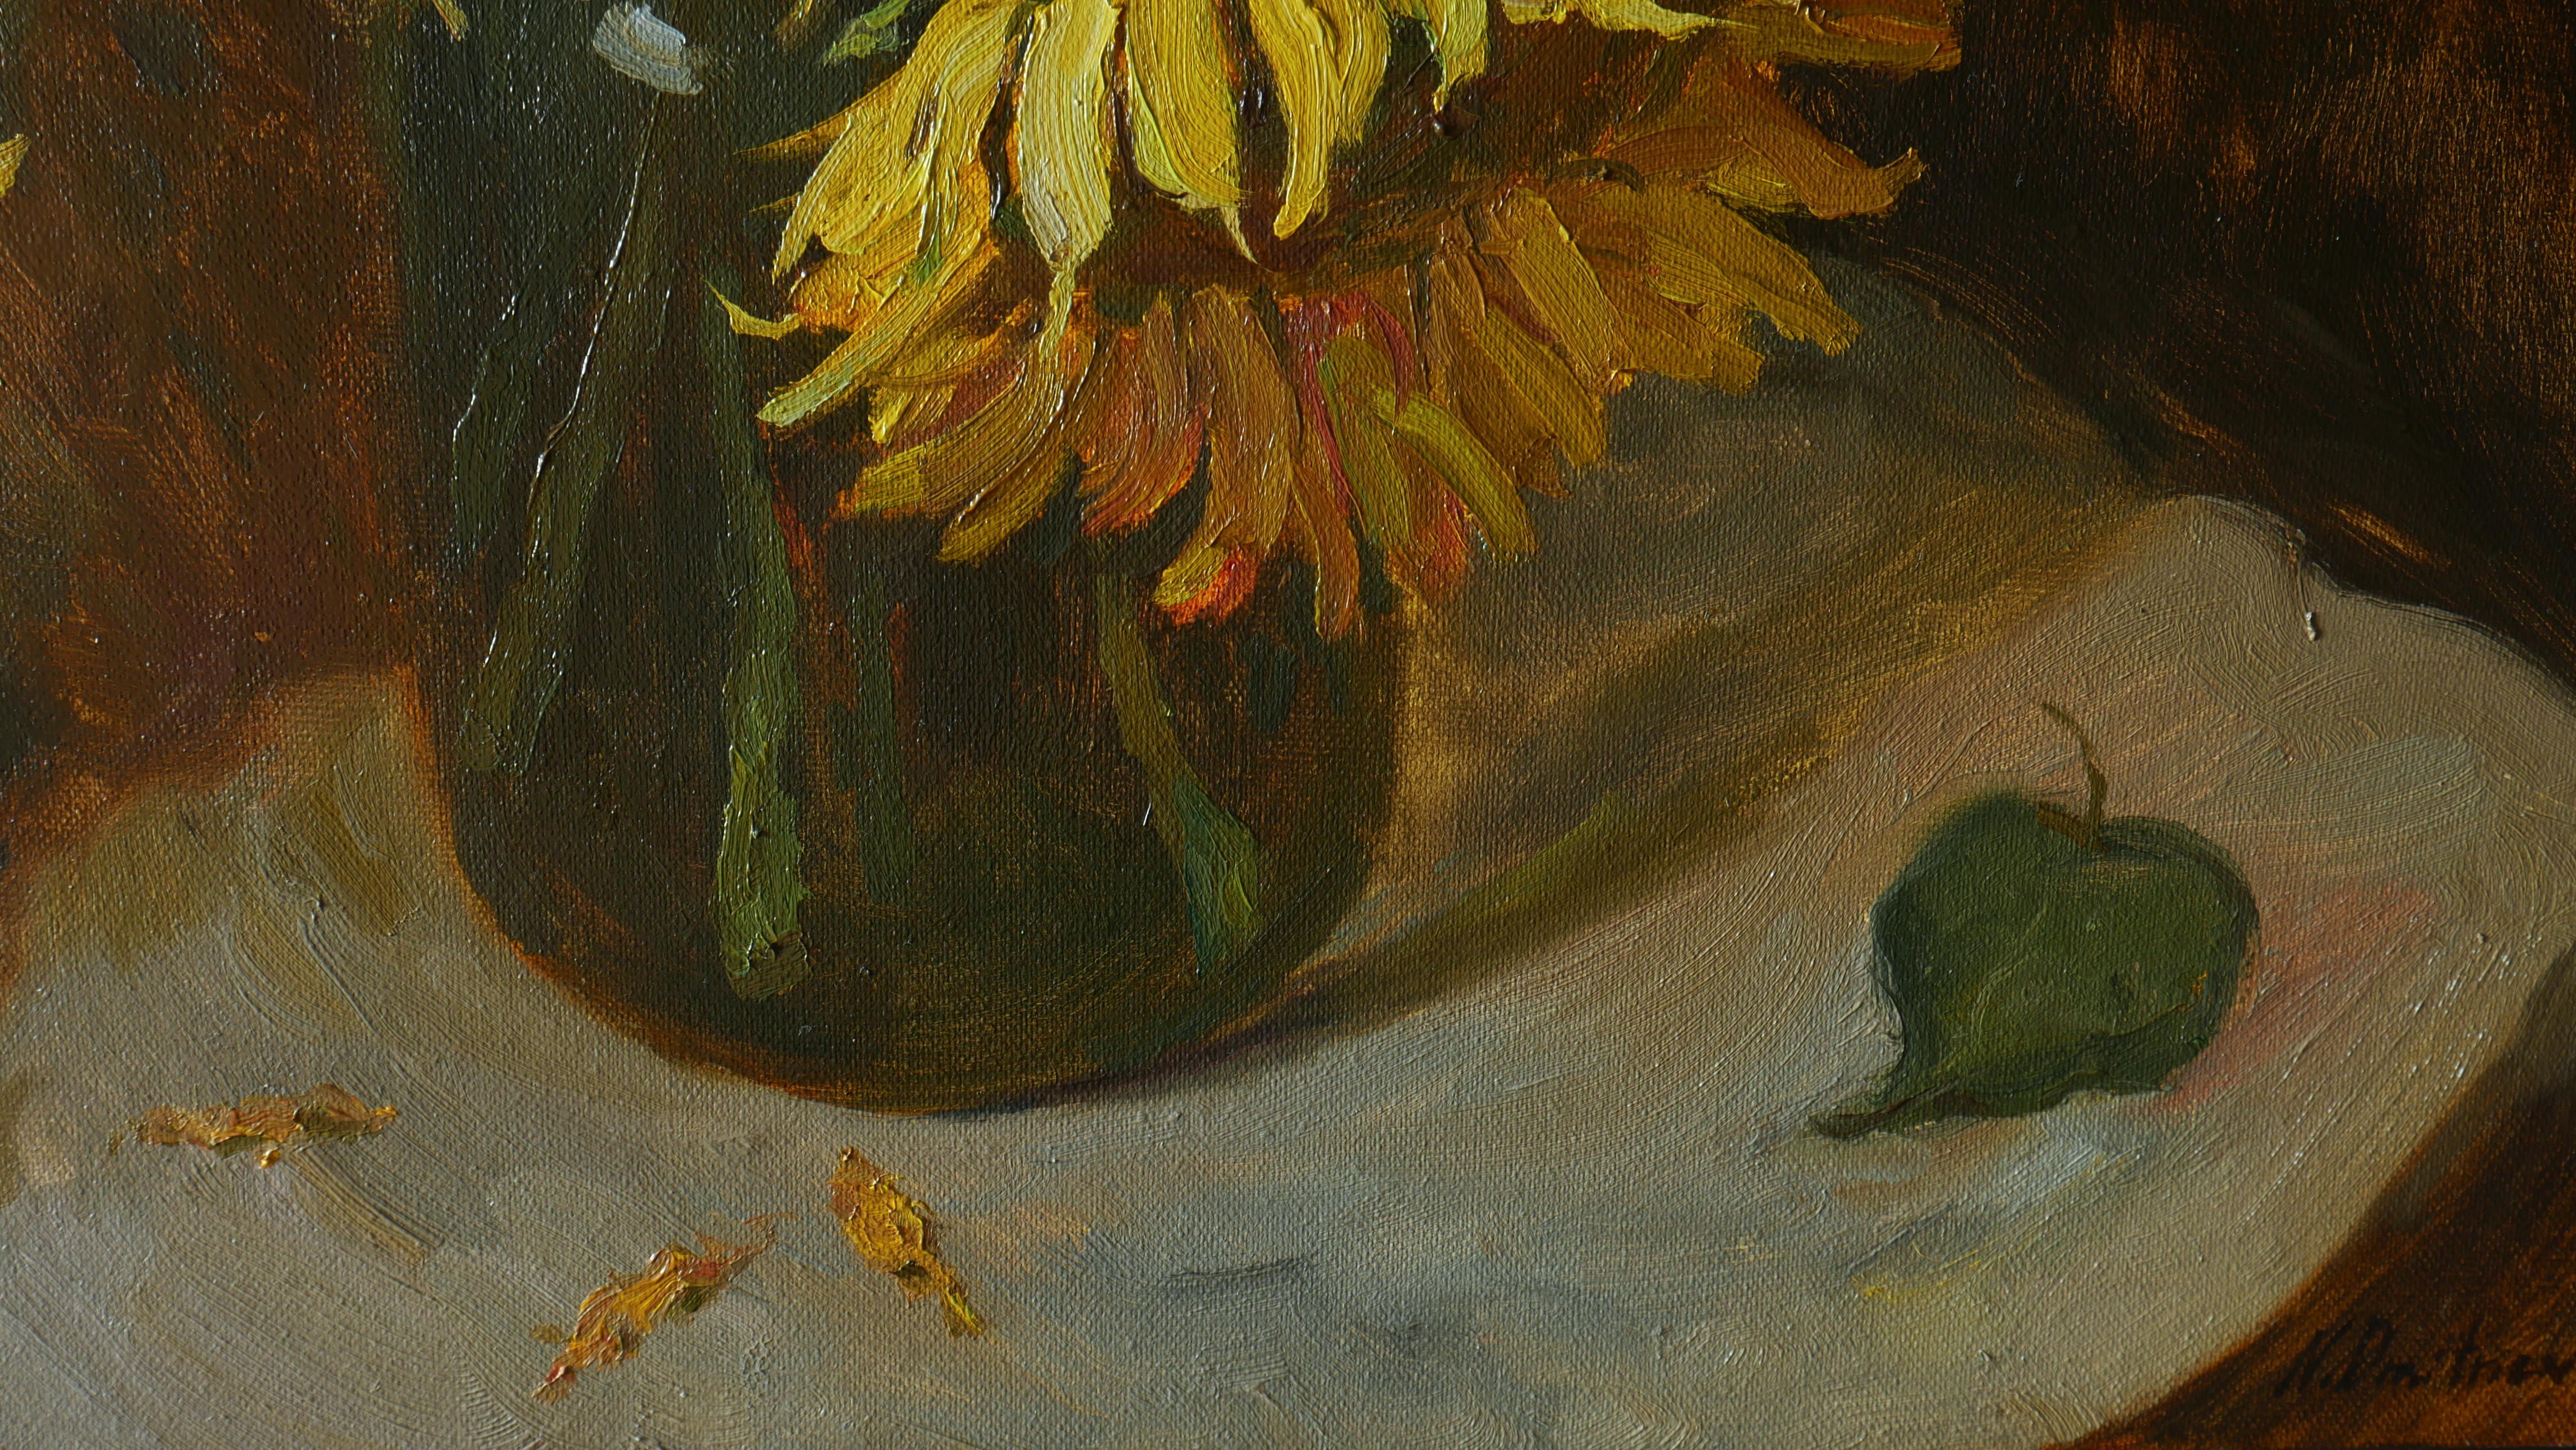 Sunflowers Near The Blue Curtain - sunflowers still life painting For Sale 4